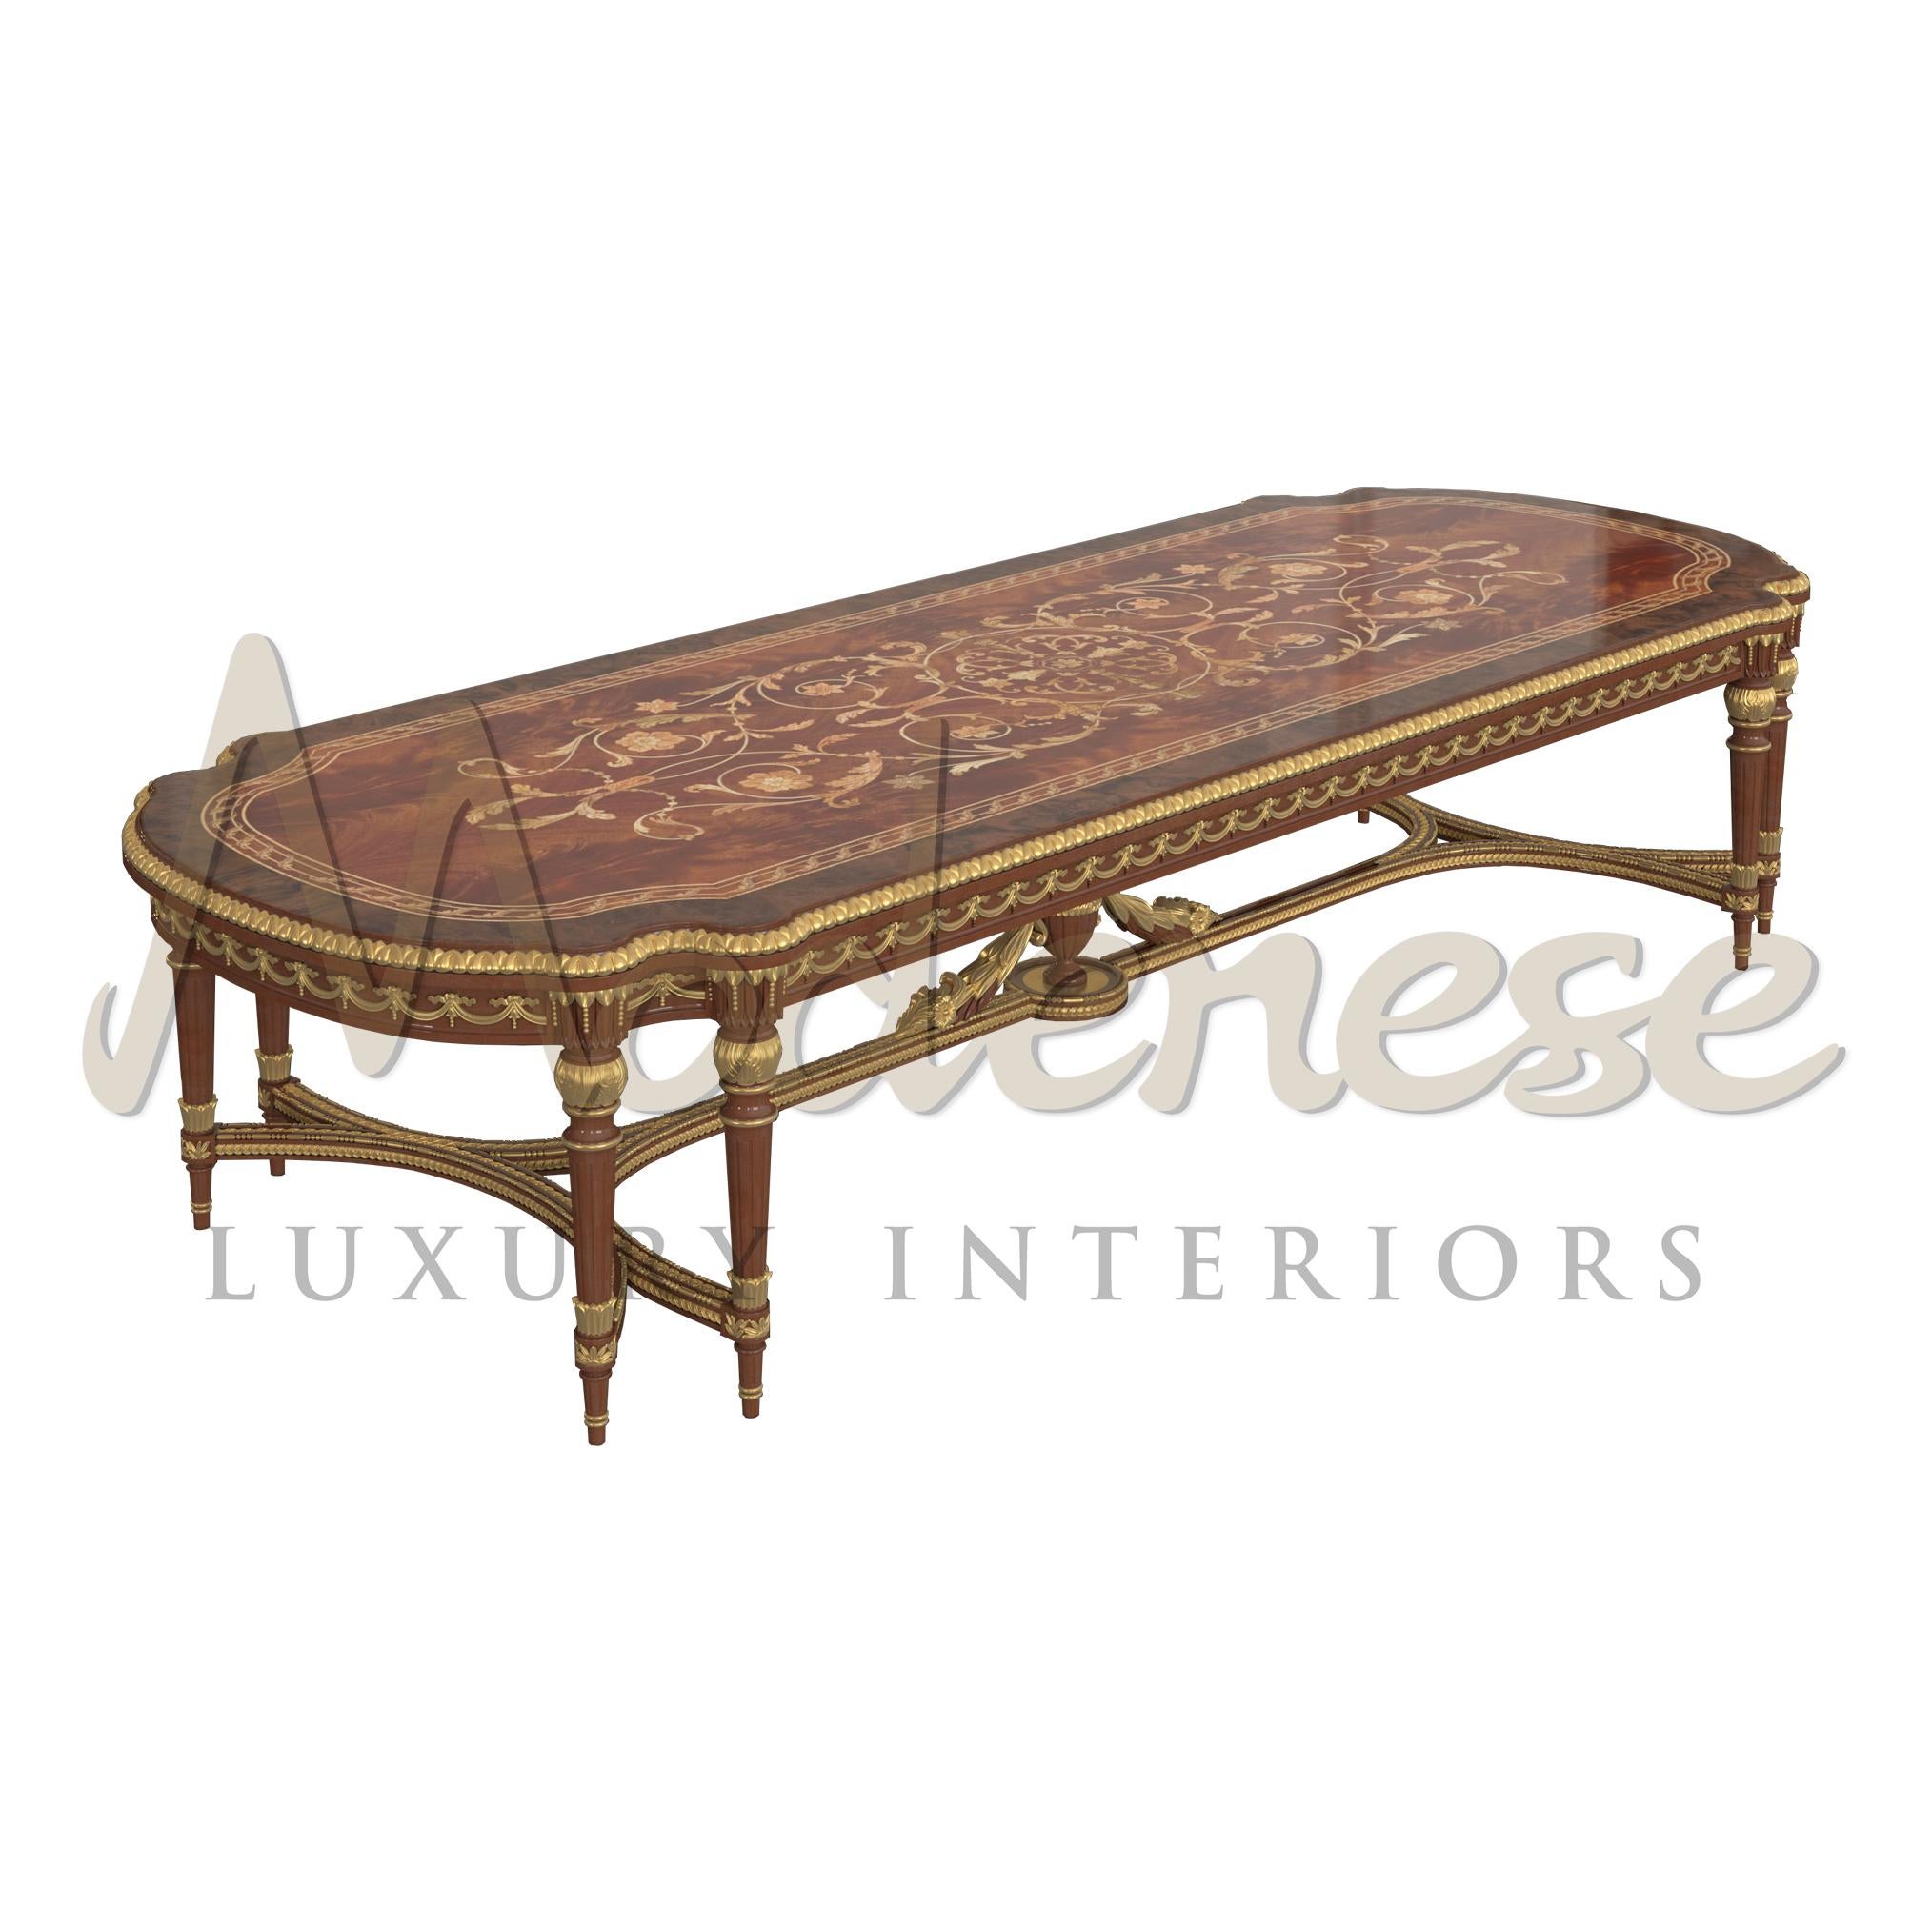 A classic large briar table, with intricate inlay design top that can accomodate a warm gathering up to 10 seatings. Ornated with golden motif details all around the table to enhance the excellency and grandeur presence. The subtle delicacy and